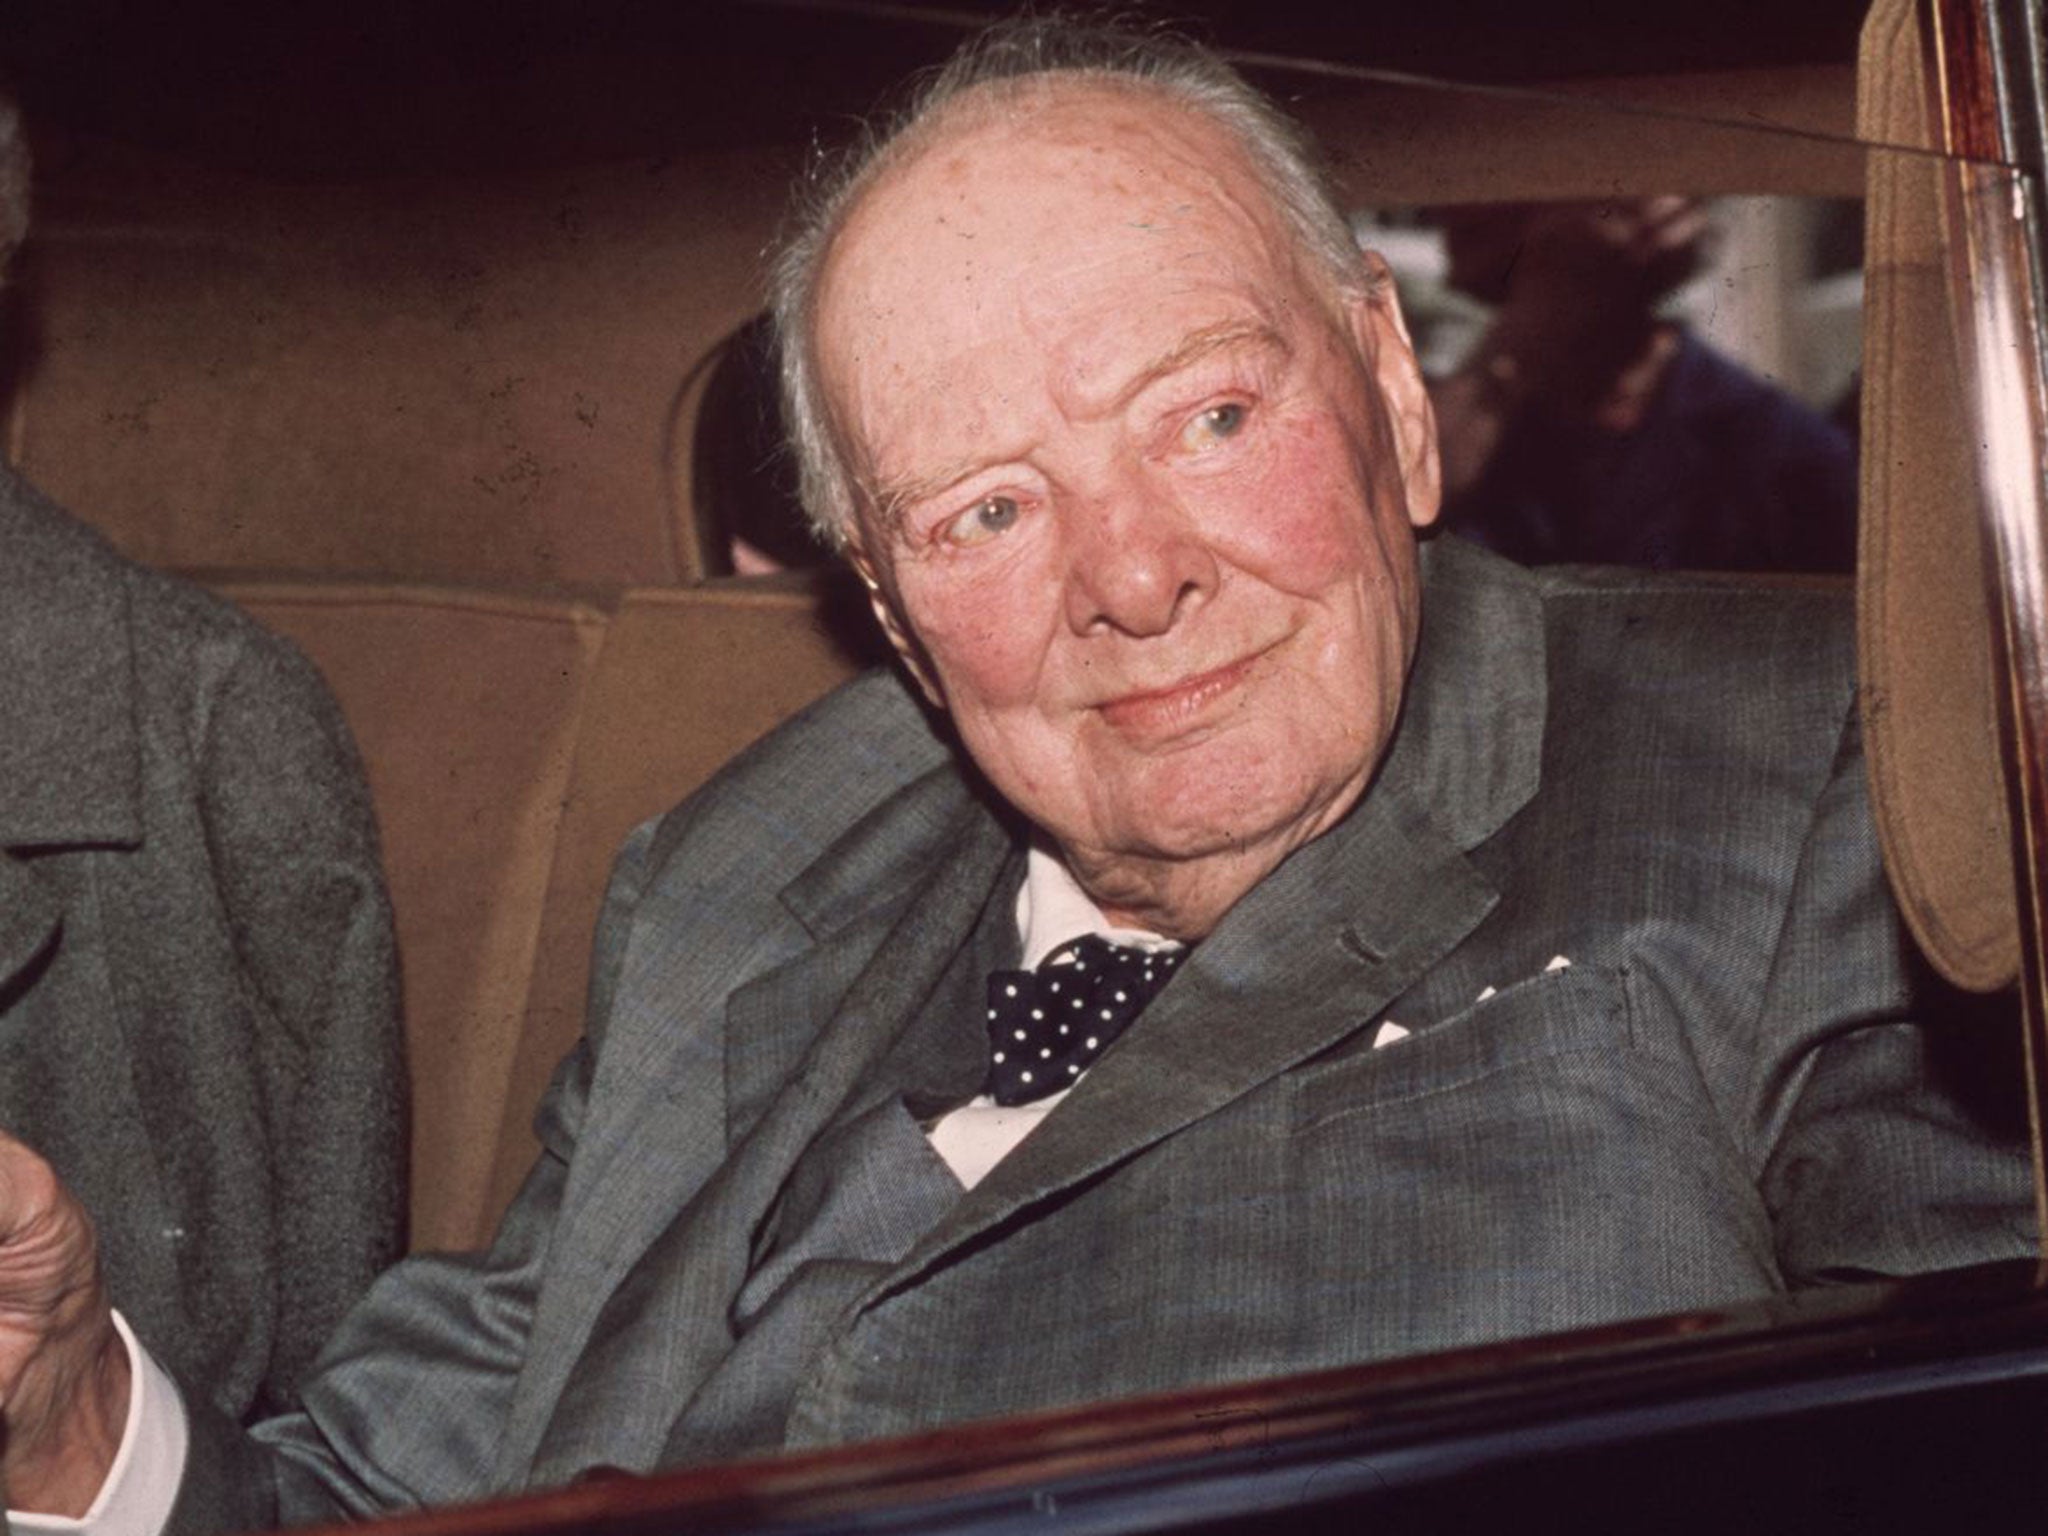 Winston Churchill would have been a Tory and not a Ukip man, says Boris Johnson